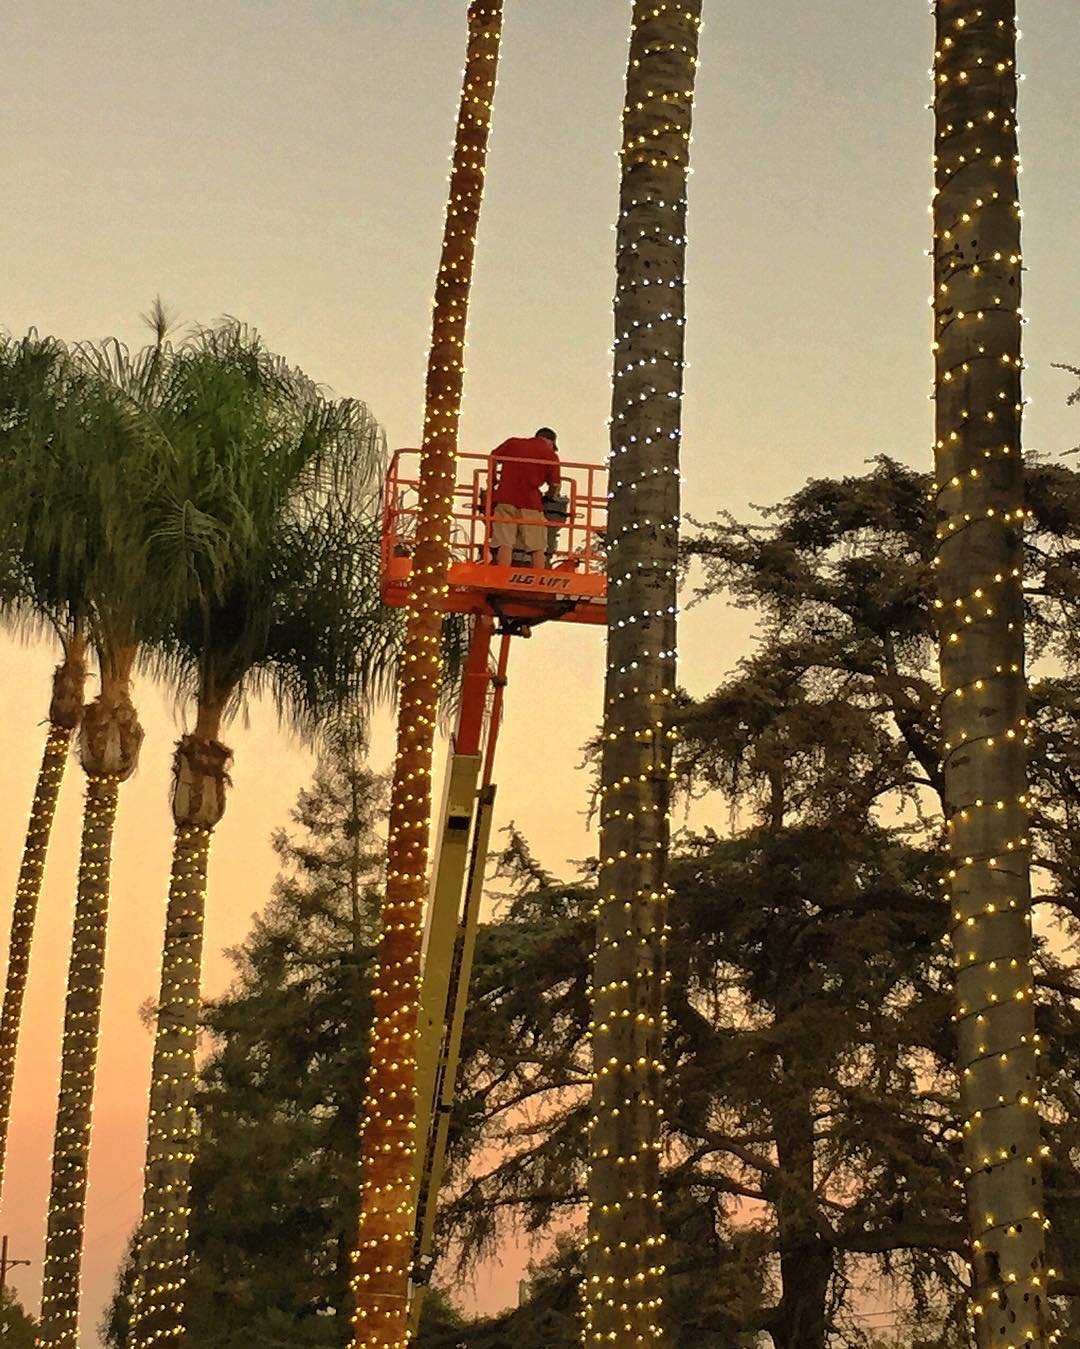 A Christmas Brothers team member hanging lights on a residential palm tree in LA as part of their Christmas light installation service